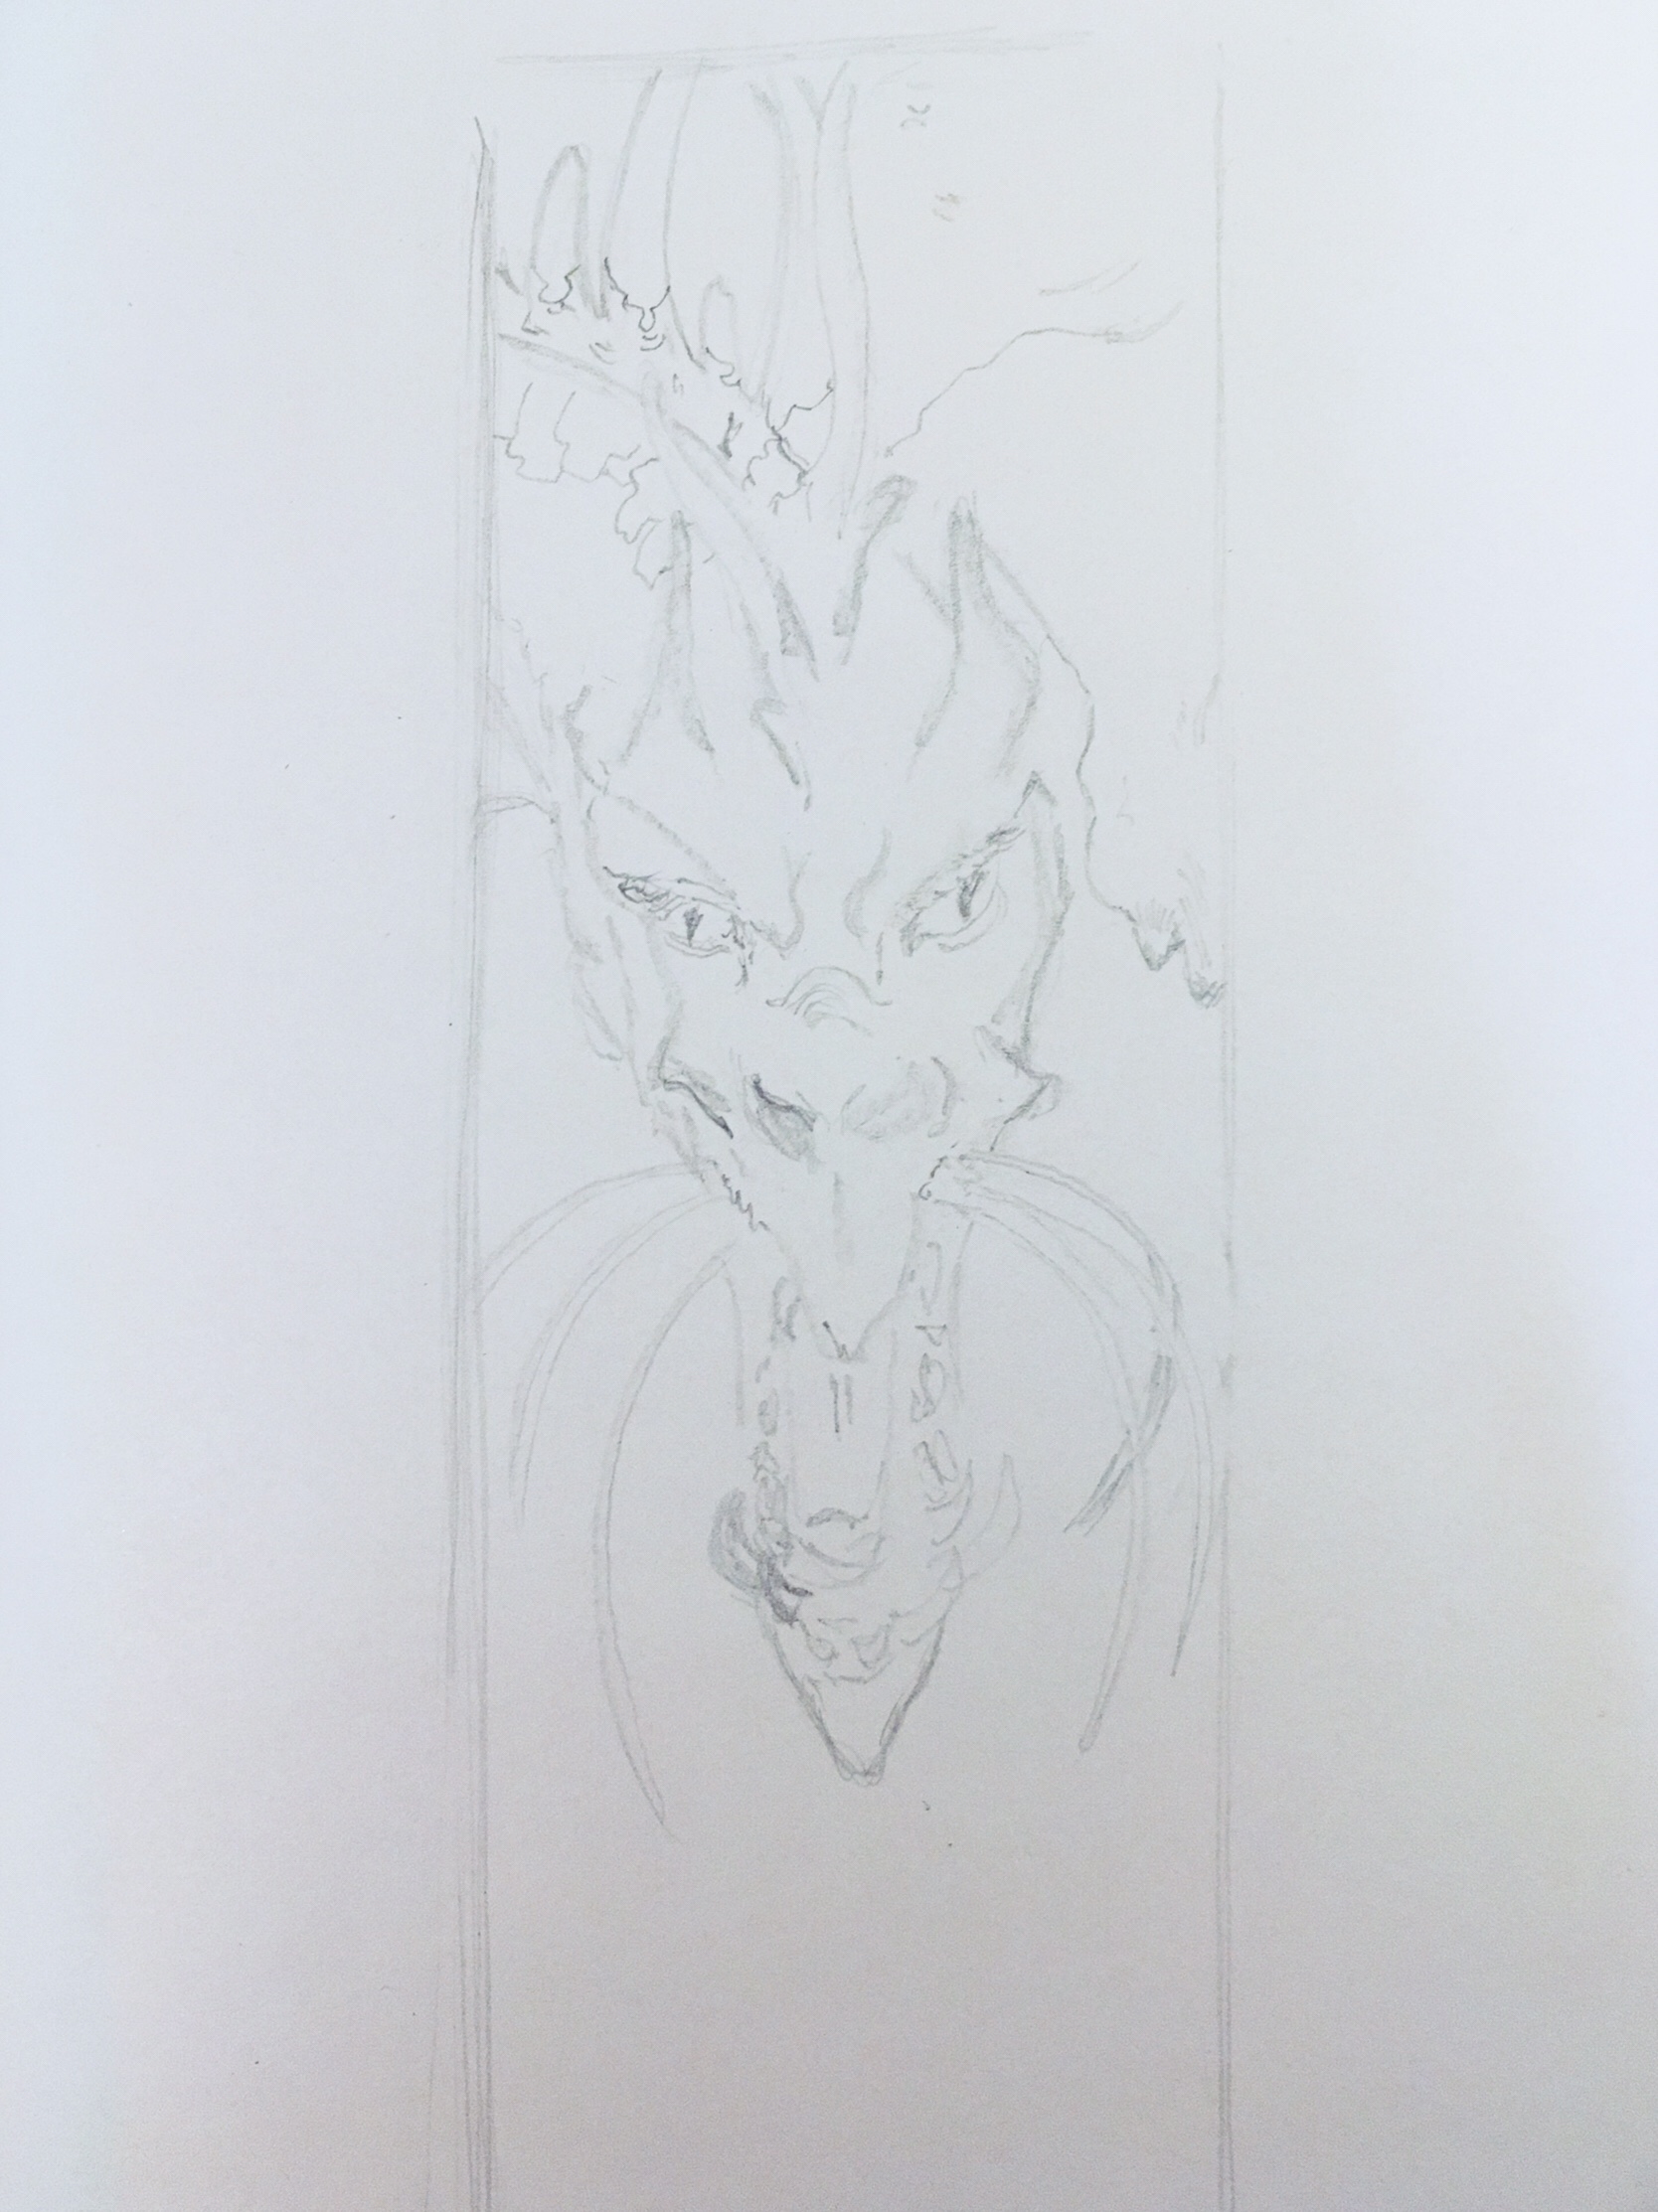 Rough pencil sketch of the dragon within a tall and narrow rectangle